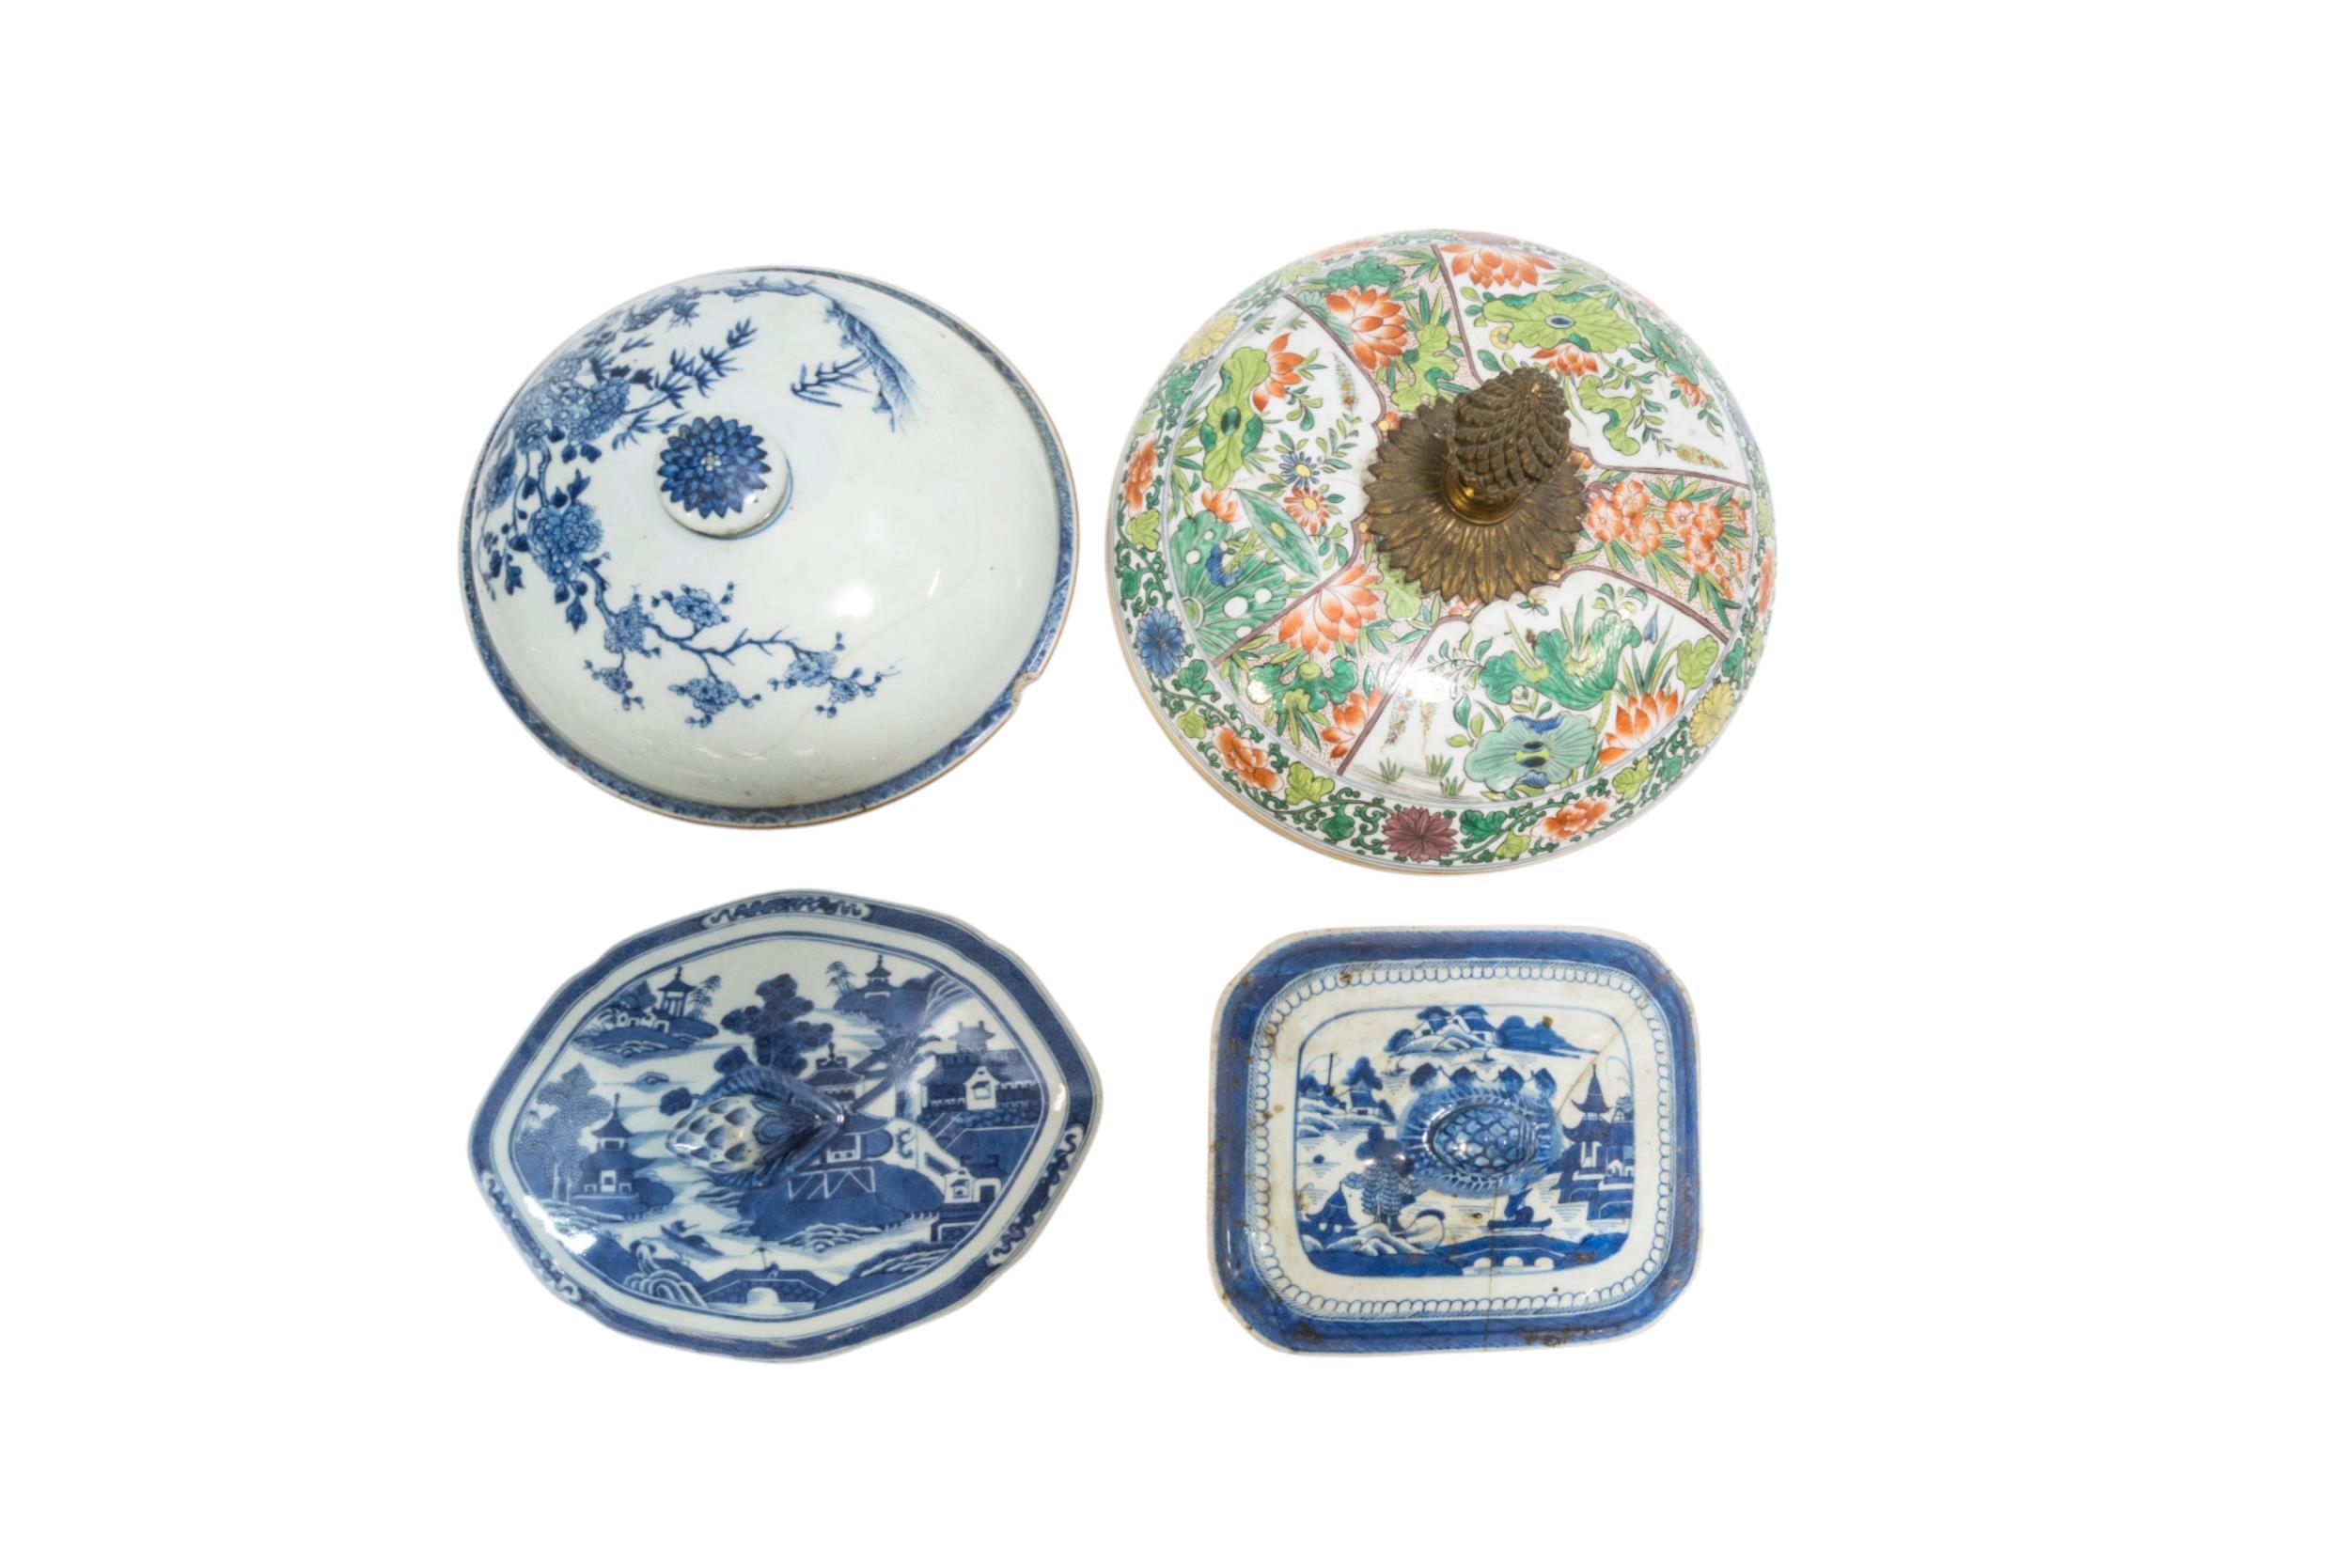 THREE CHINESE EXPORT TUREEN BASES AND A MIXED GROUP OF SIXTEEN COVERS, QING DYNASTY, LATE 18TH / - Image 4 of 7